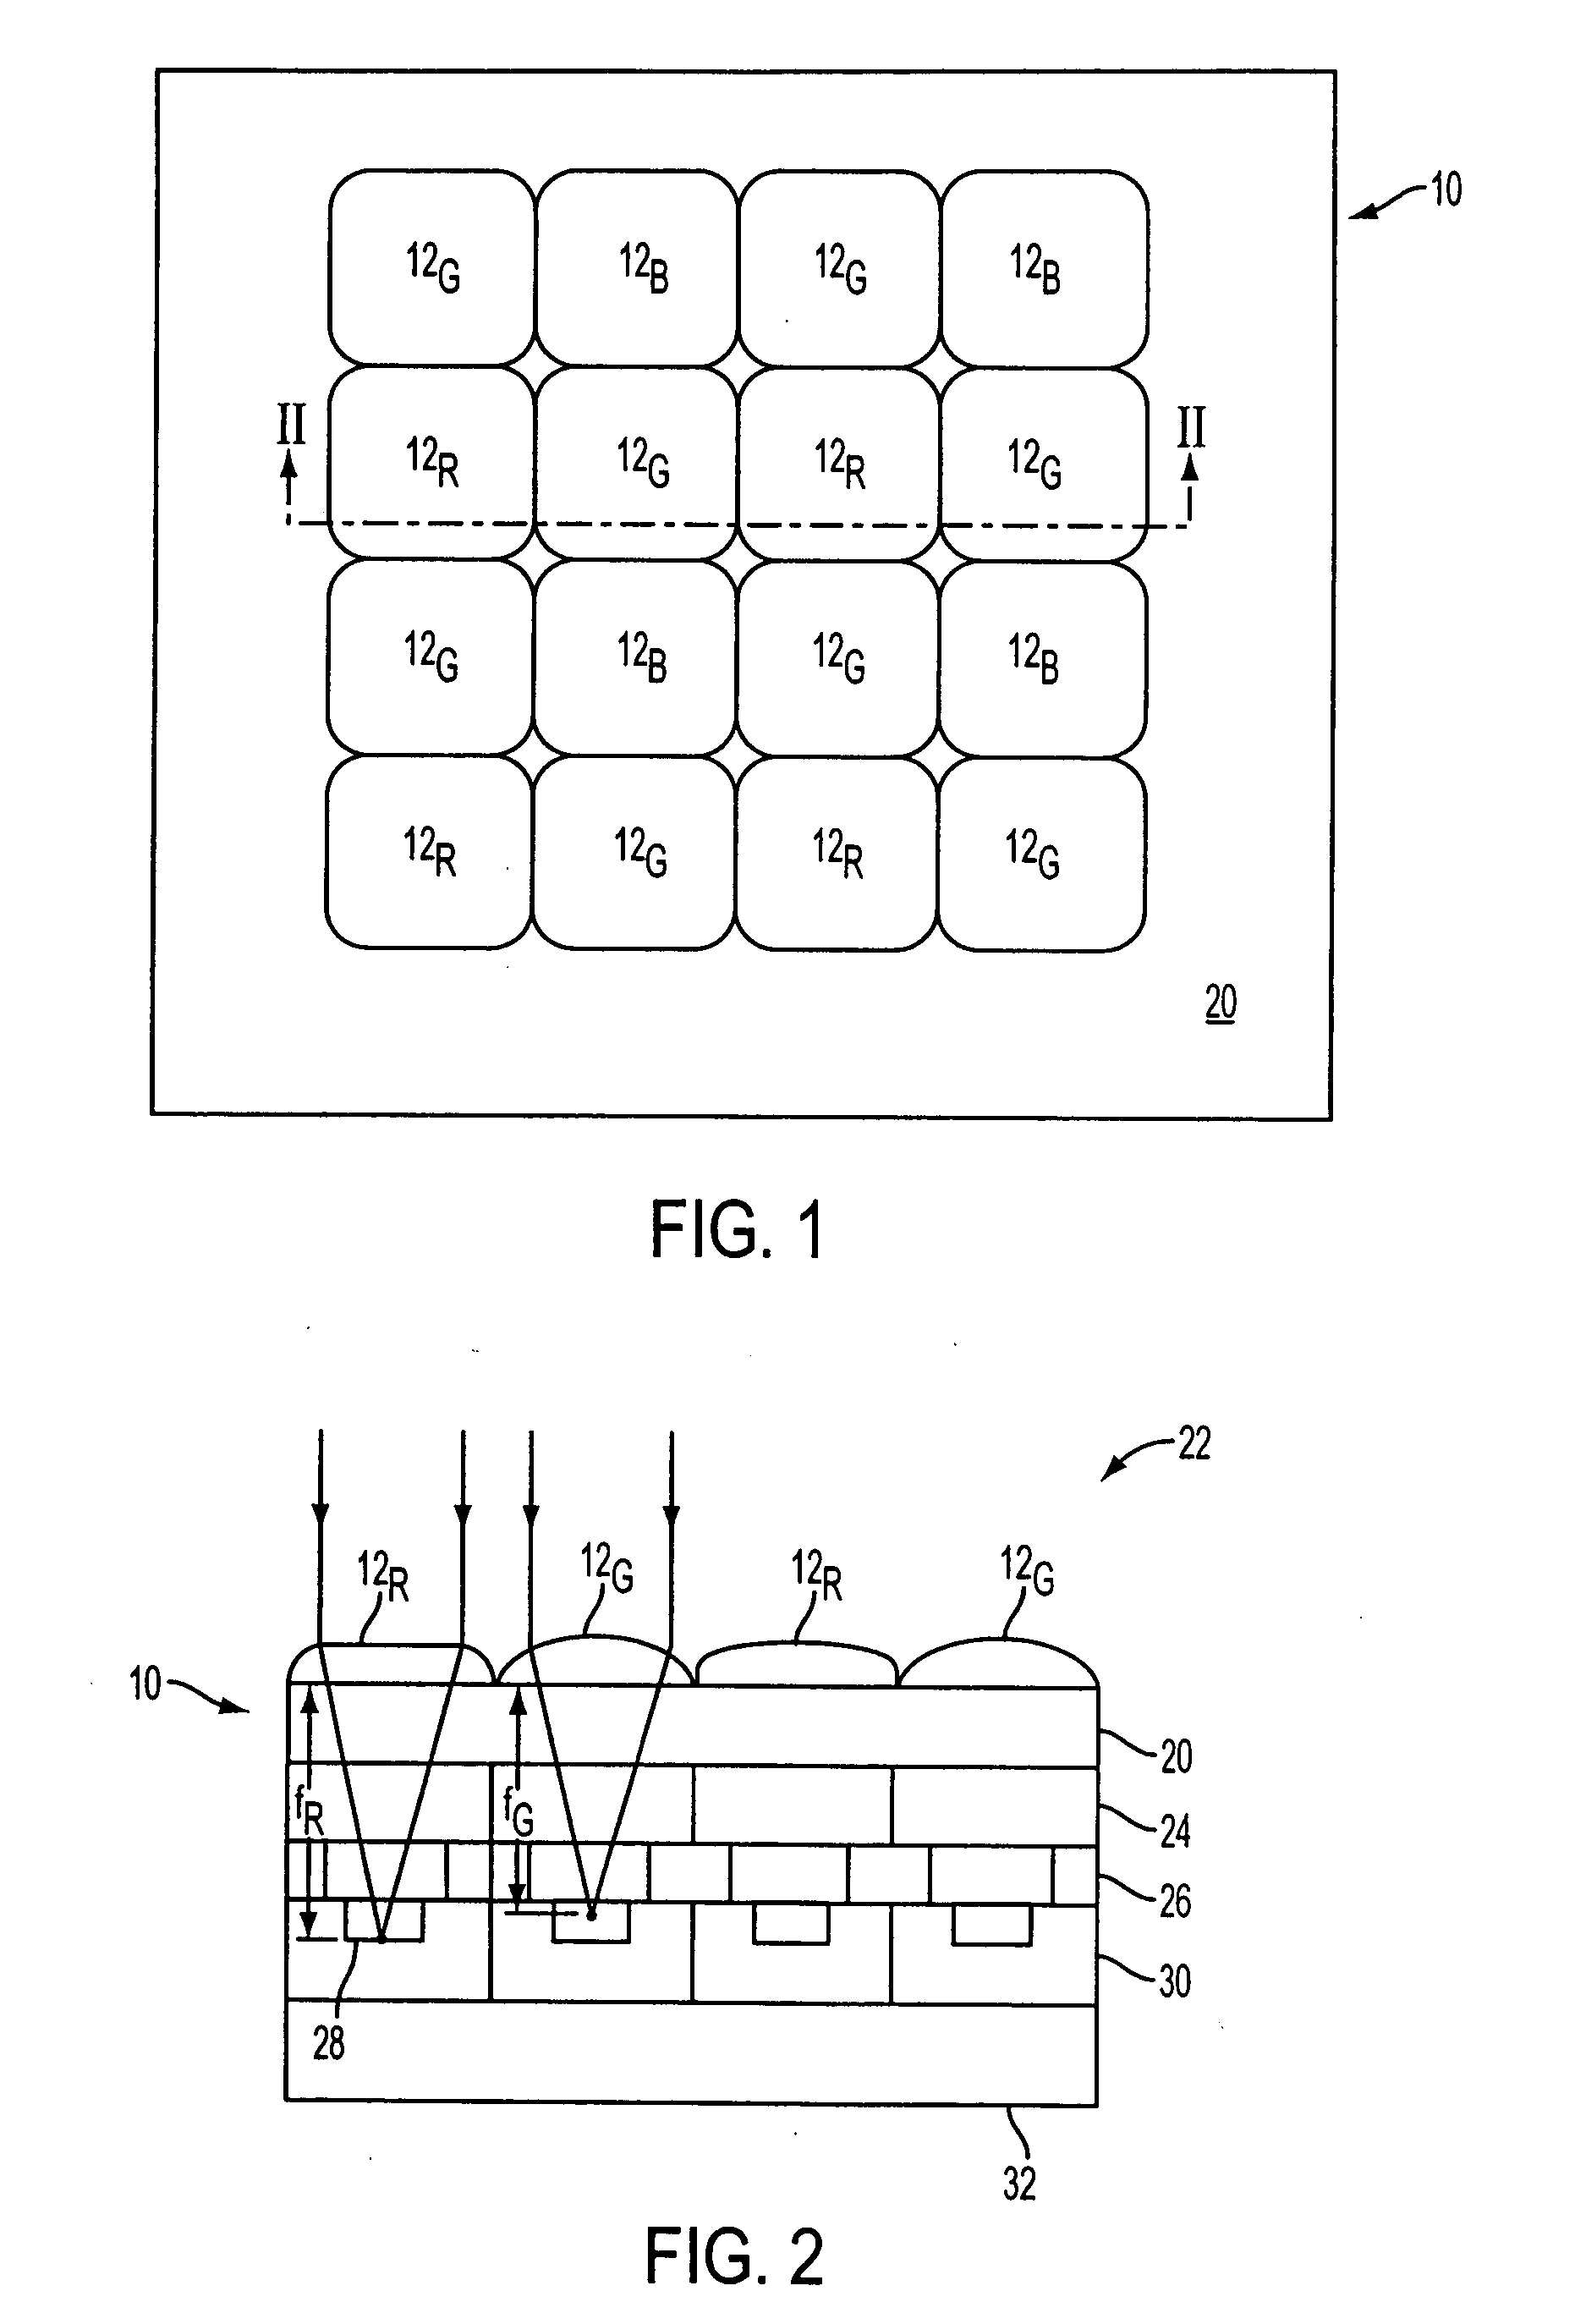 Controlling lens shape in a microlens array